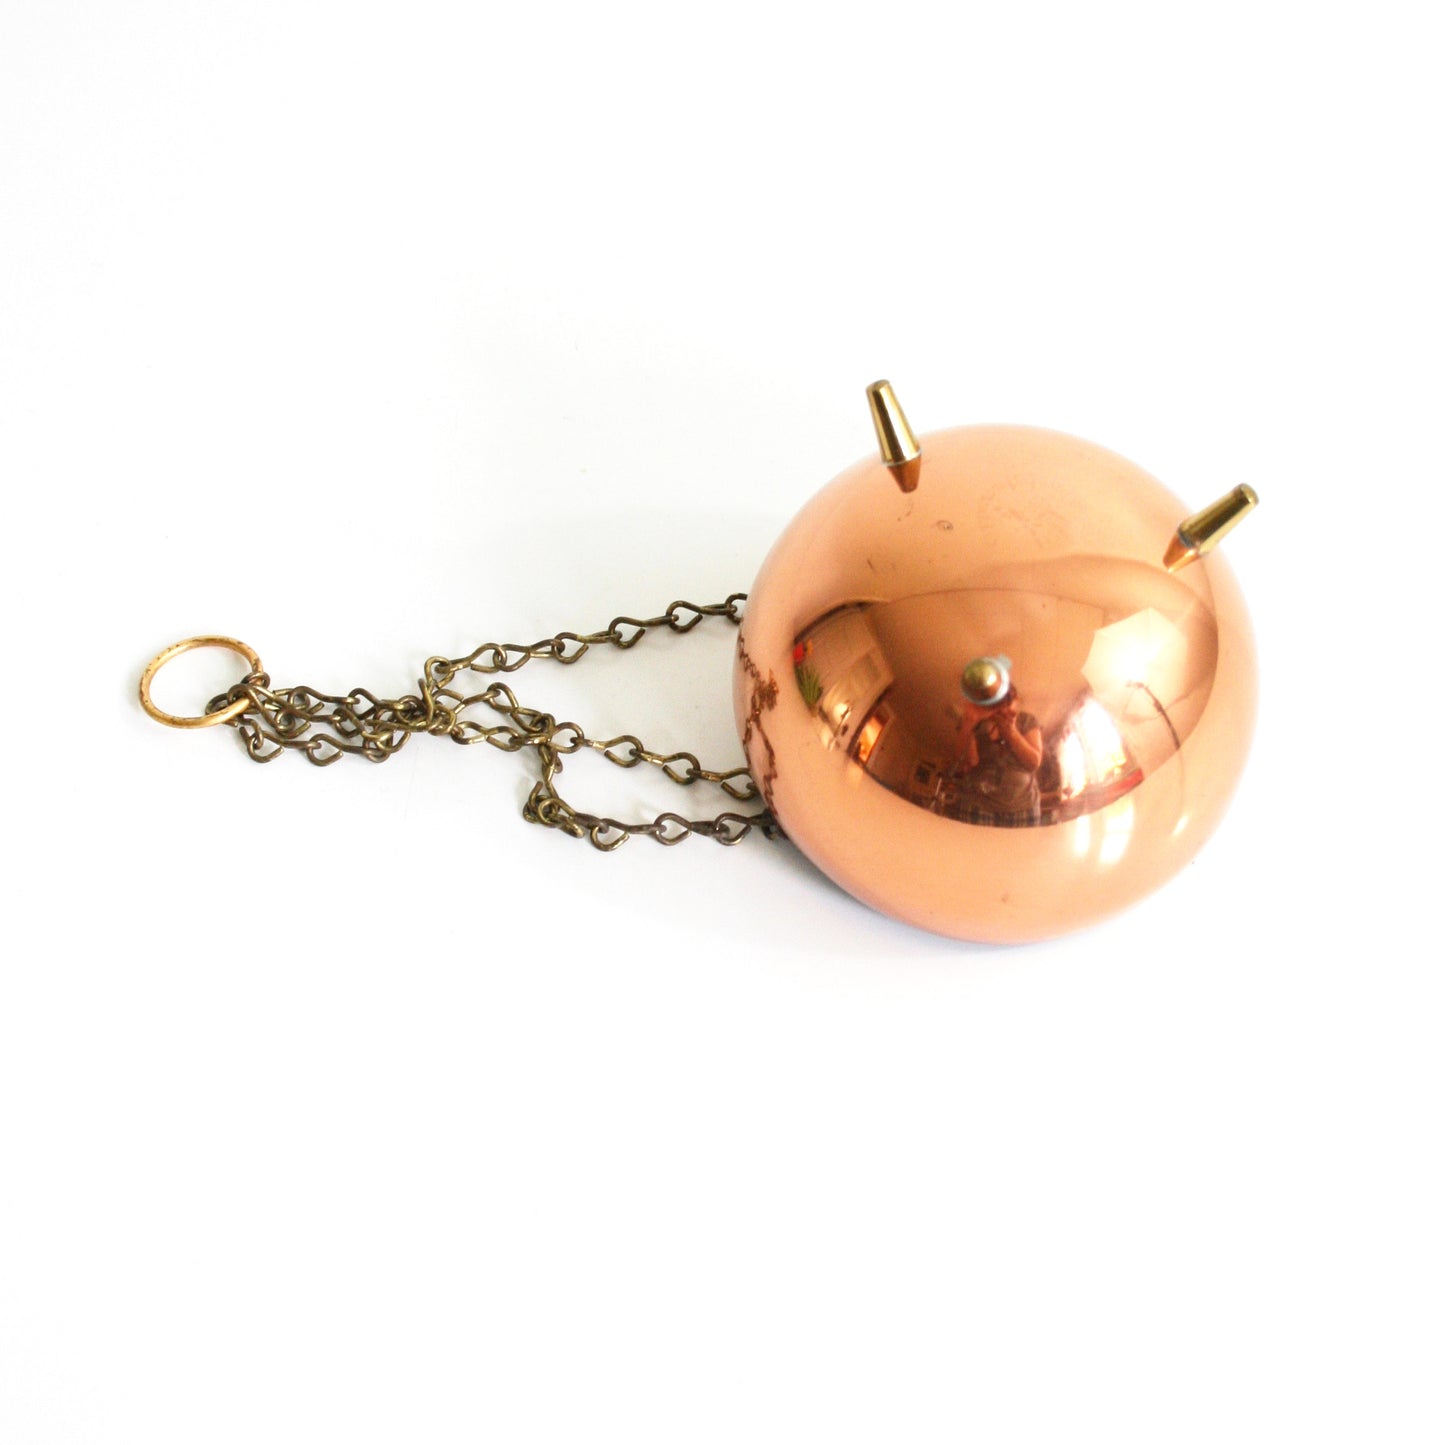 SOLD - Vintage Hanging Footed Copper Planter by Coppercraft Guild / Vintage Copper and Brass Plant Pot